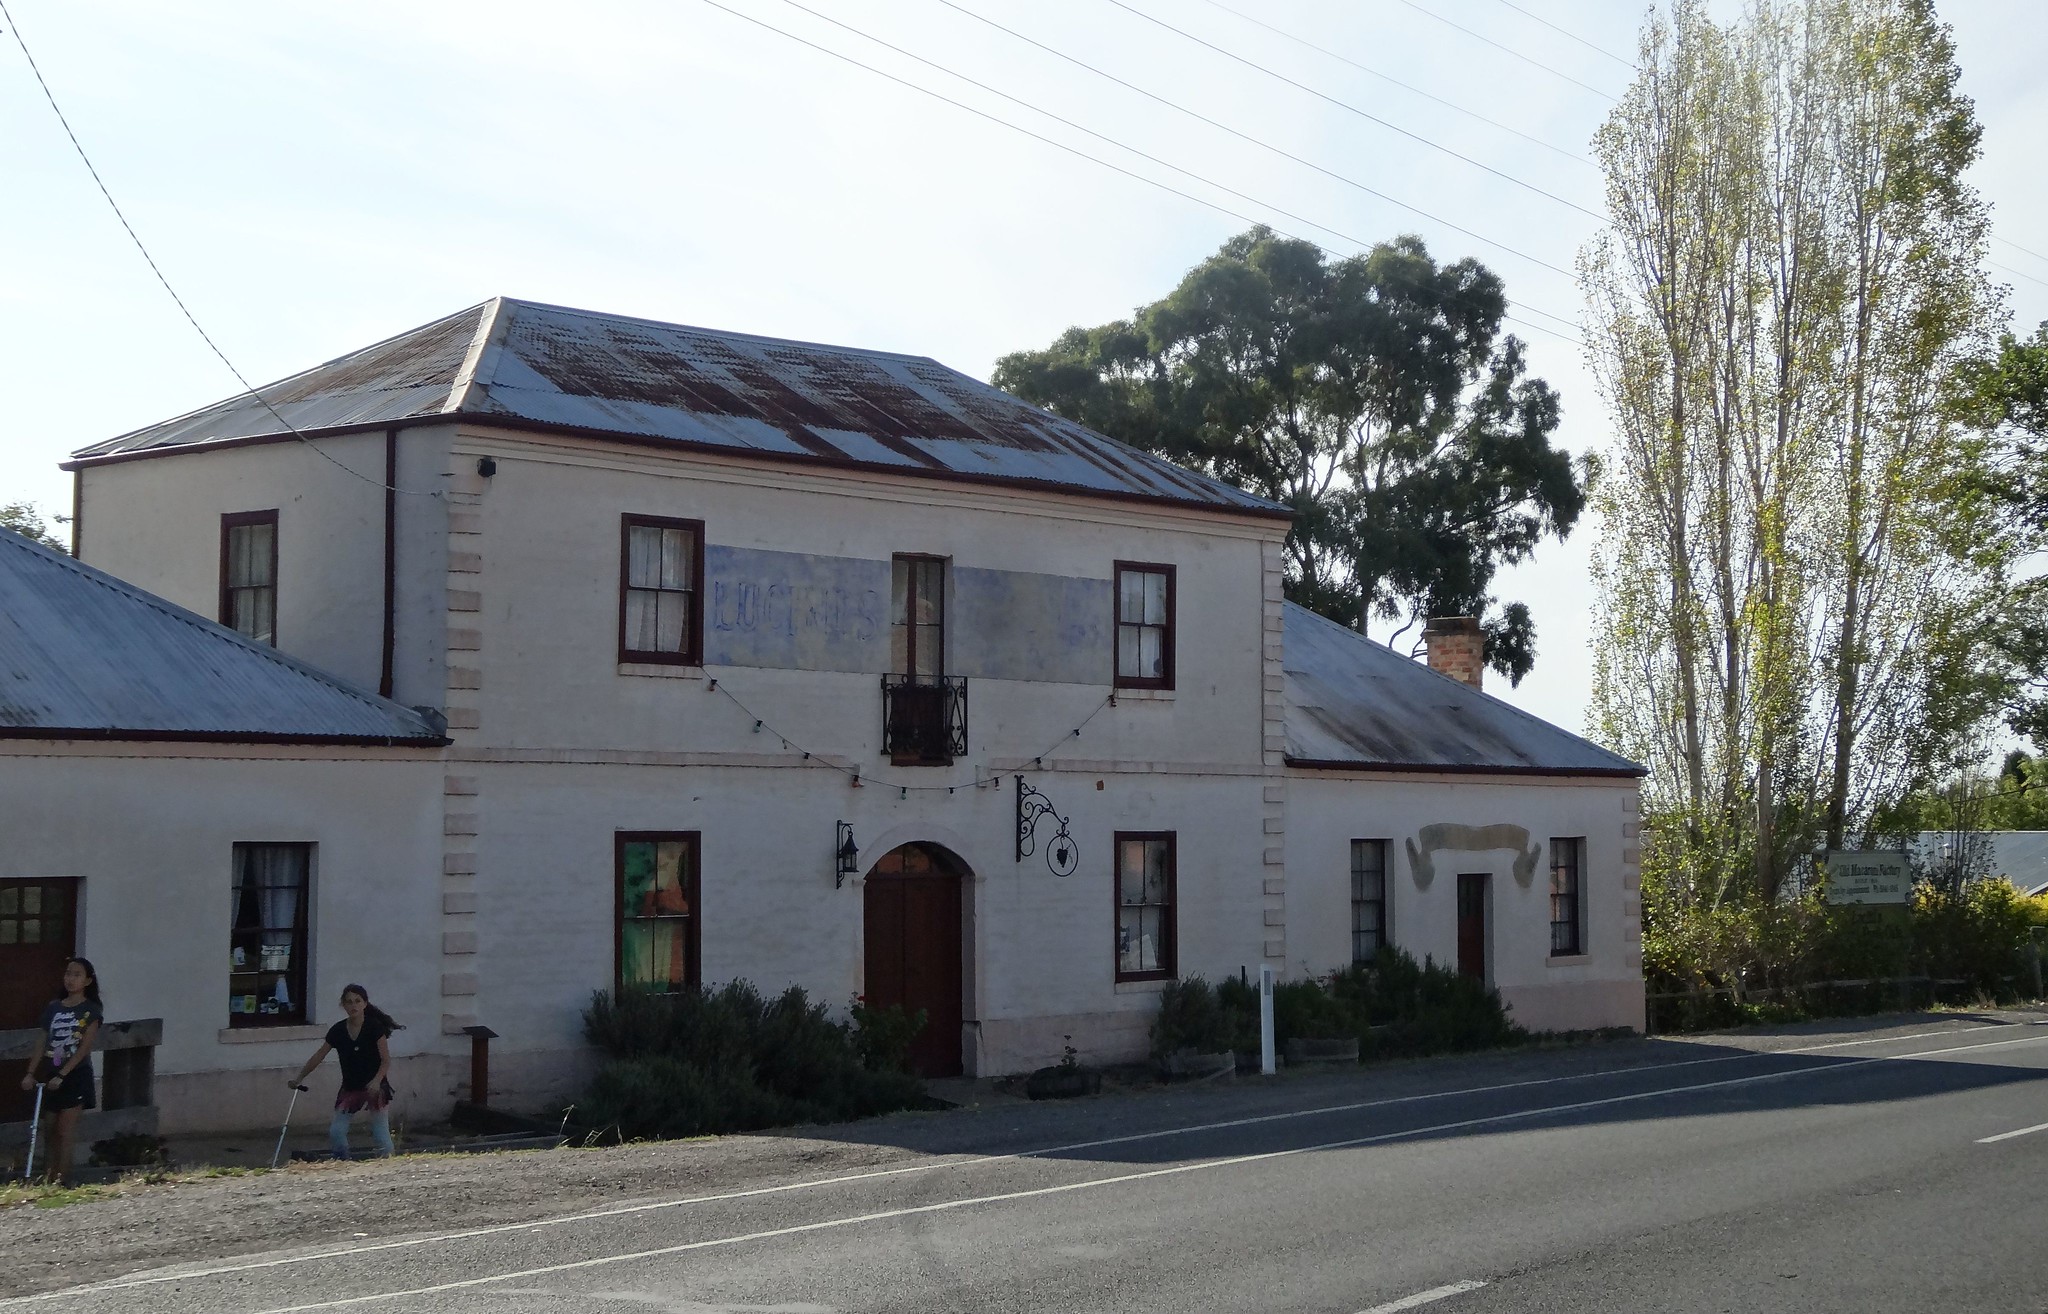 Hepburn Springs. The old Macaroni factory which dates from 1859.